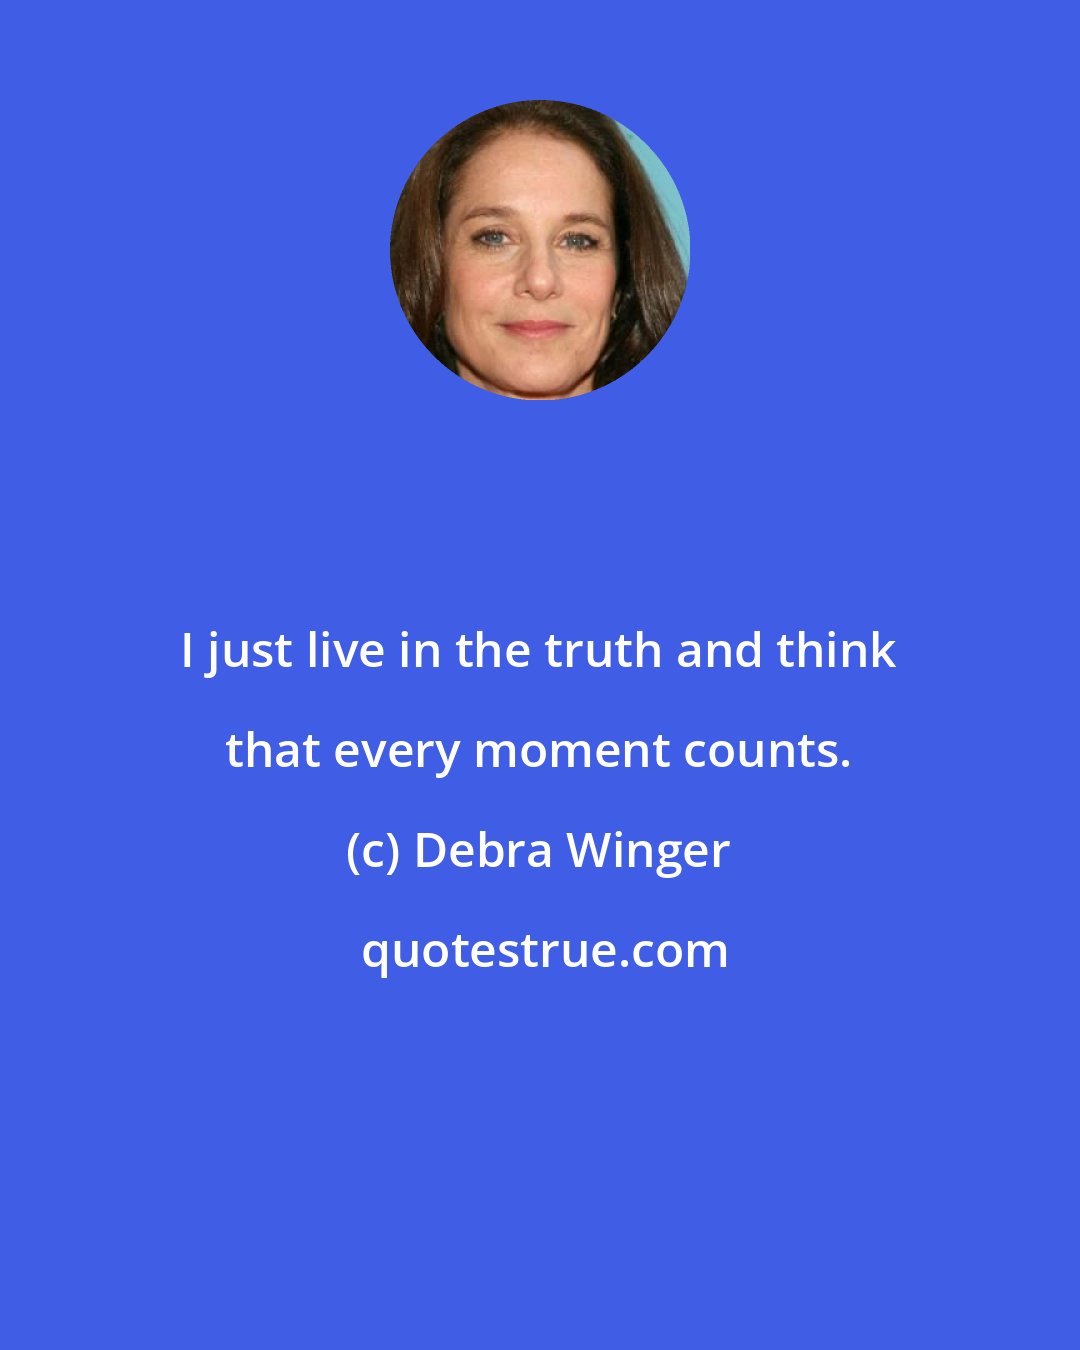 Debra Winger: I just live in the truth and think that every moment counts.